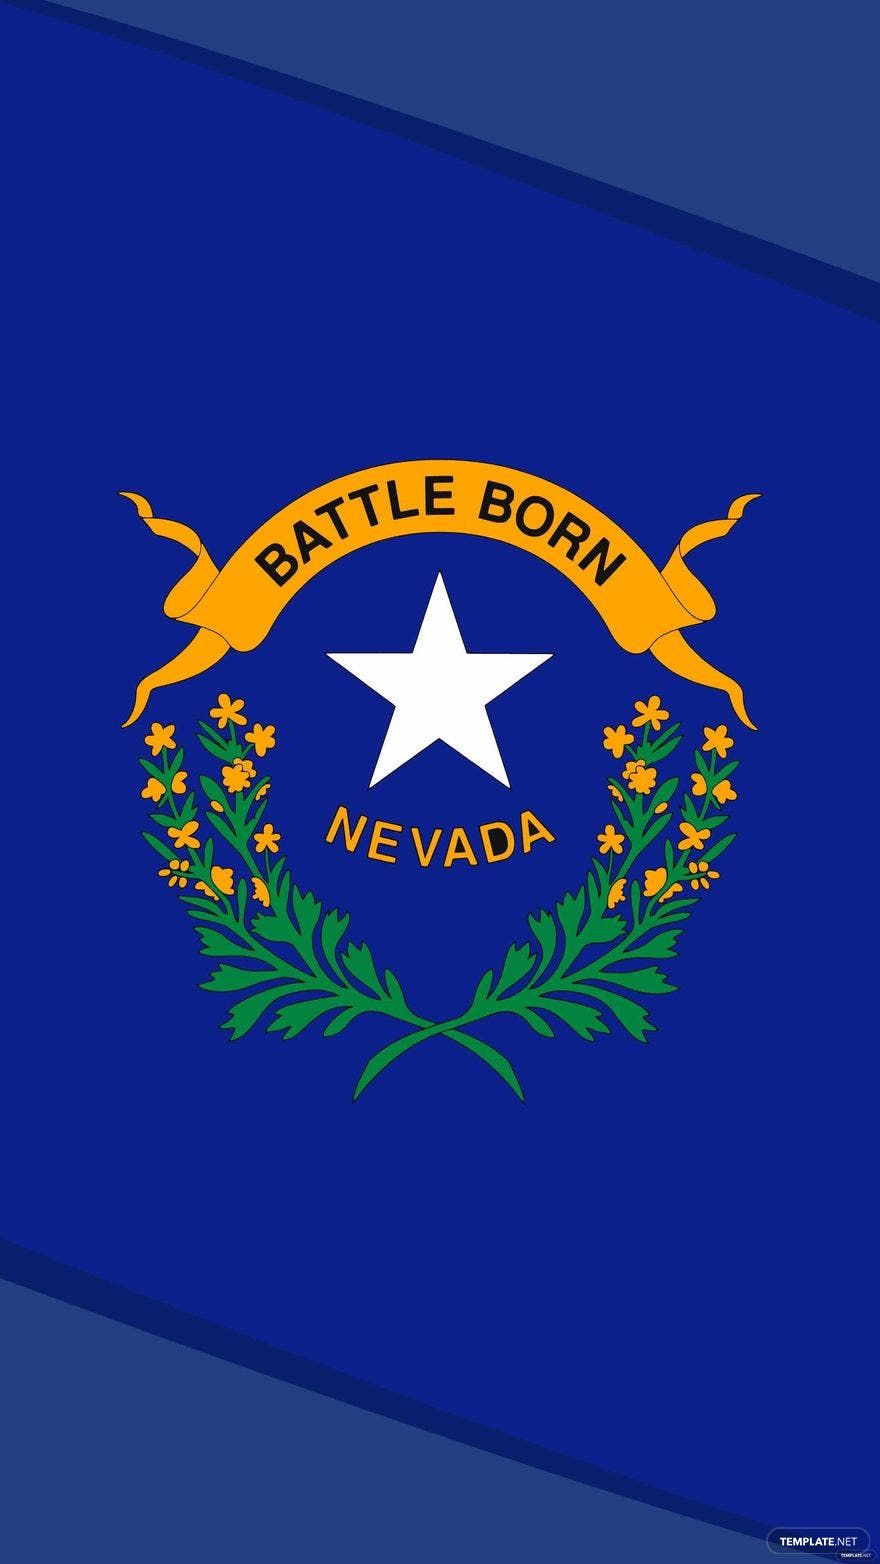 Free Nevada Day iPhone Background in PDF, Illustrator, PSD, EPS, SVG, JPG, PNG